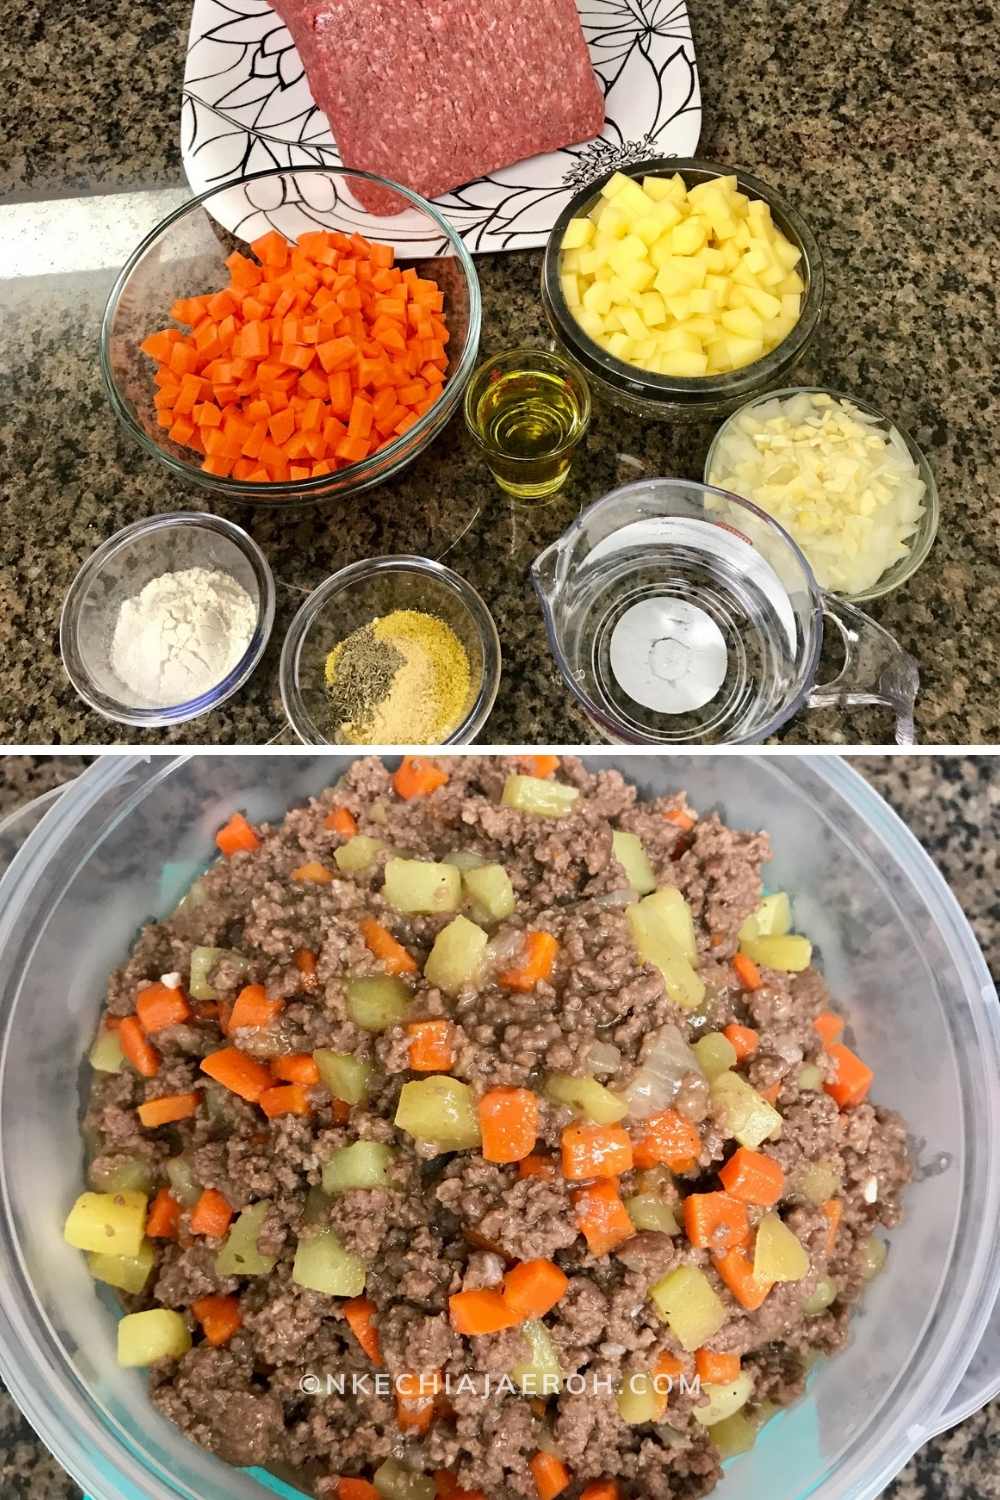 Ingredients for making the filling of authentic Nigerian Meat Pie recipe include ground meat or mined meat (usually red meat or beef). Then carrots, potatoes, onions, salt, pepper, seasoning cube, thyme, and curry.